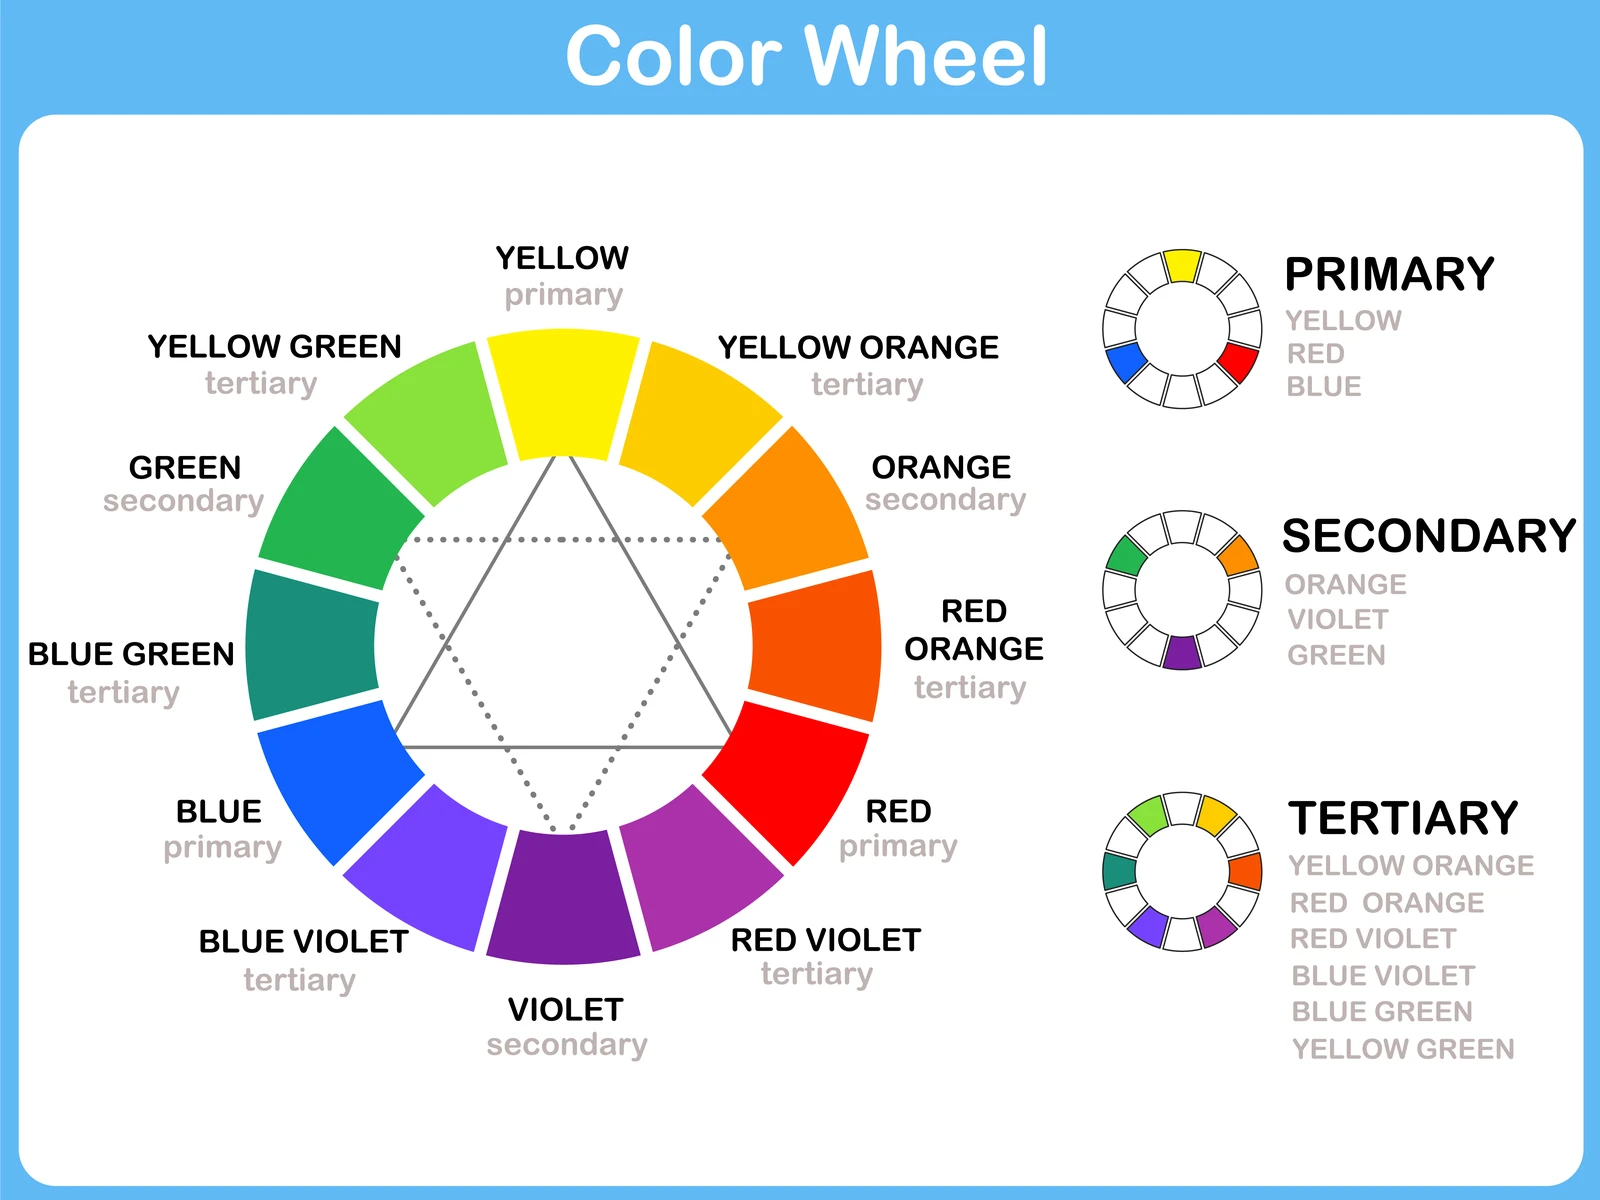 Image showing the color wheel hair theory chart with primary, secondary, and tertiary colors on it